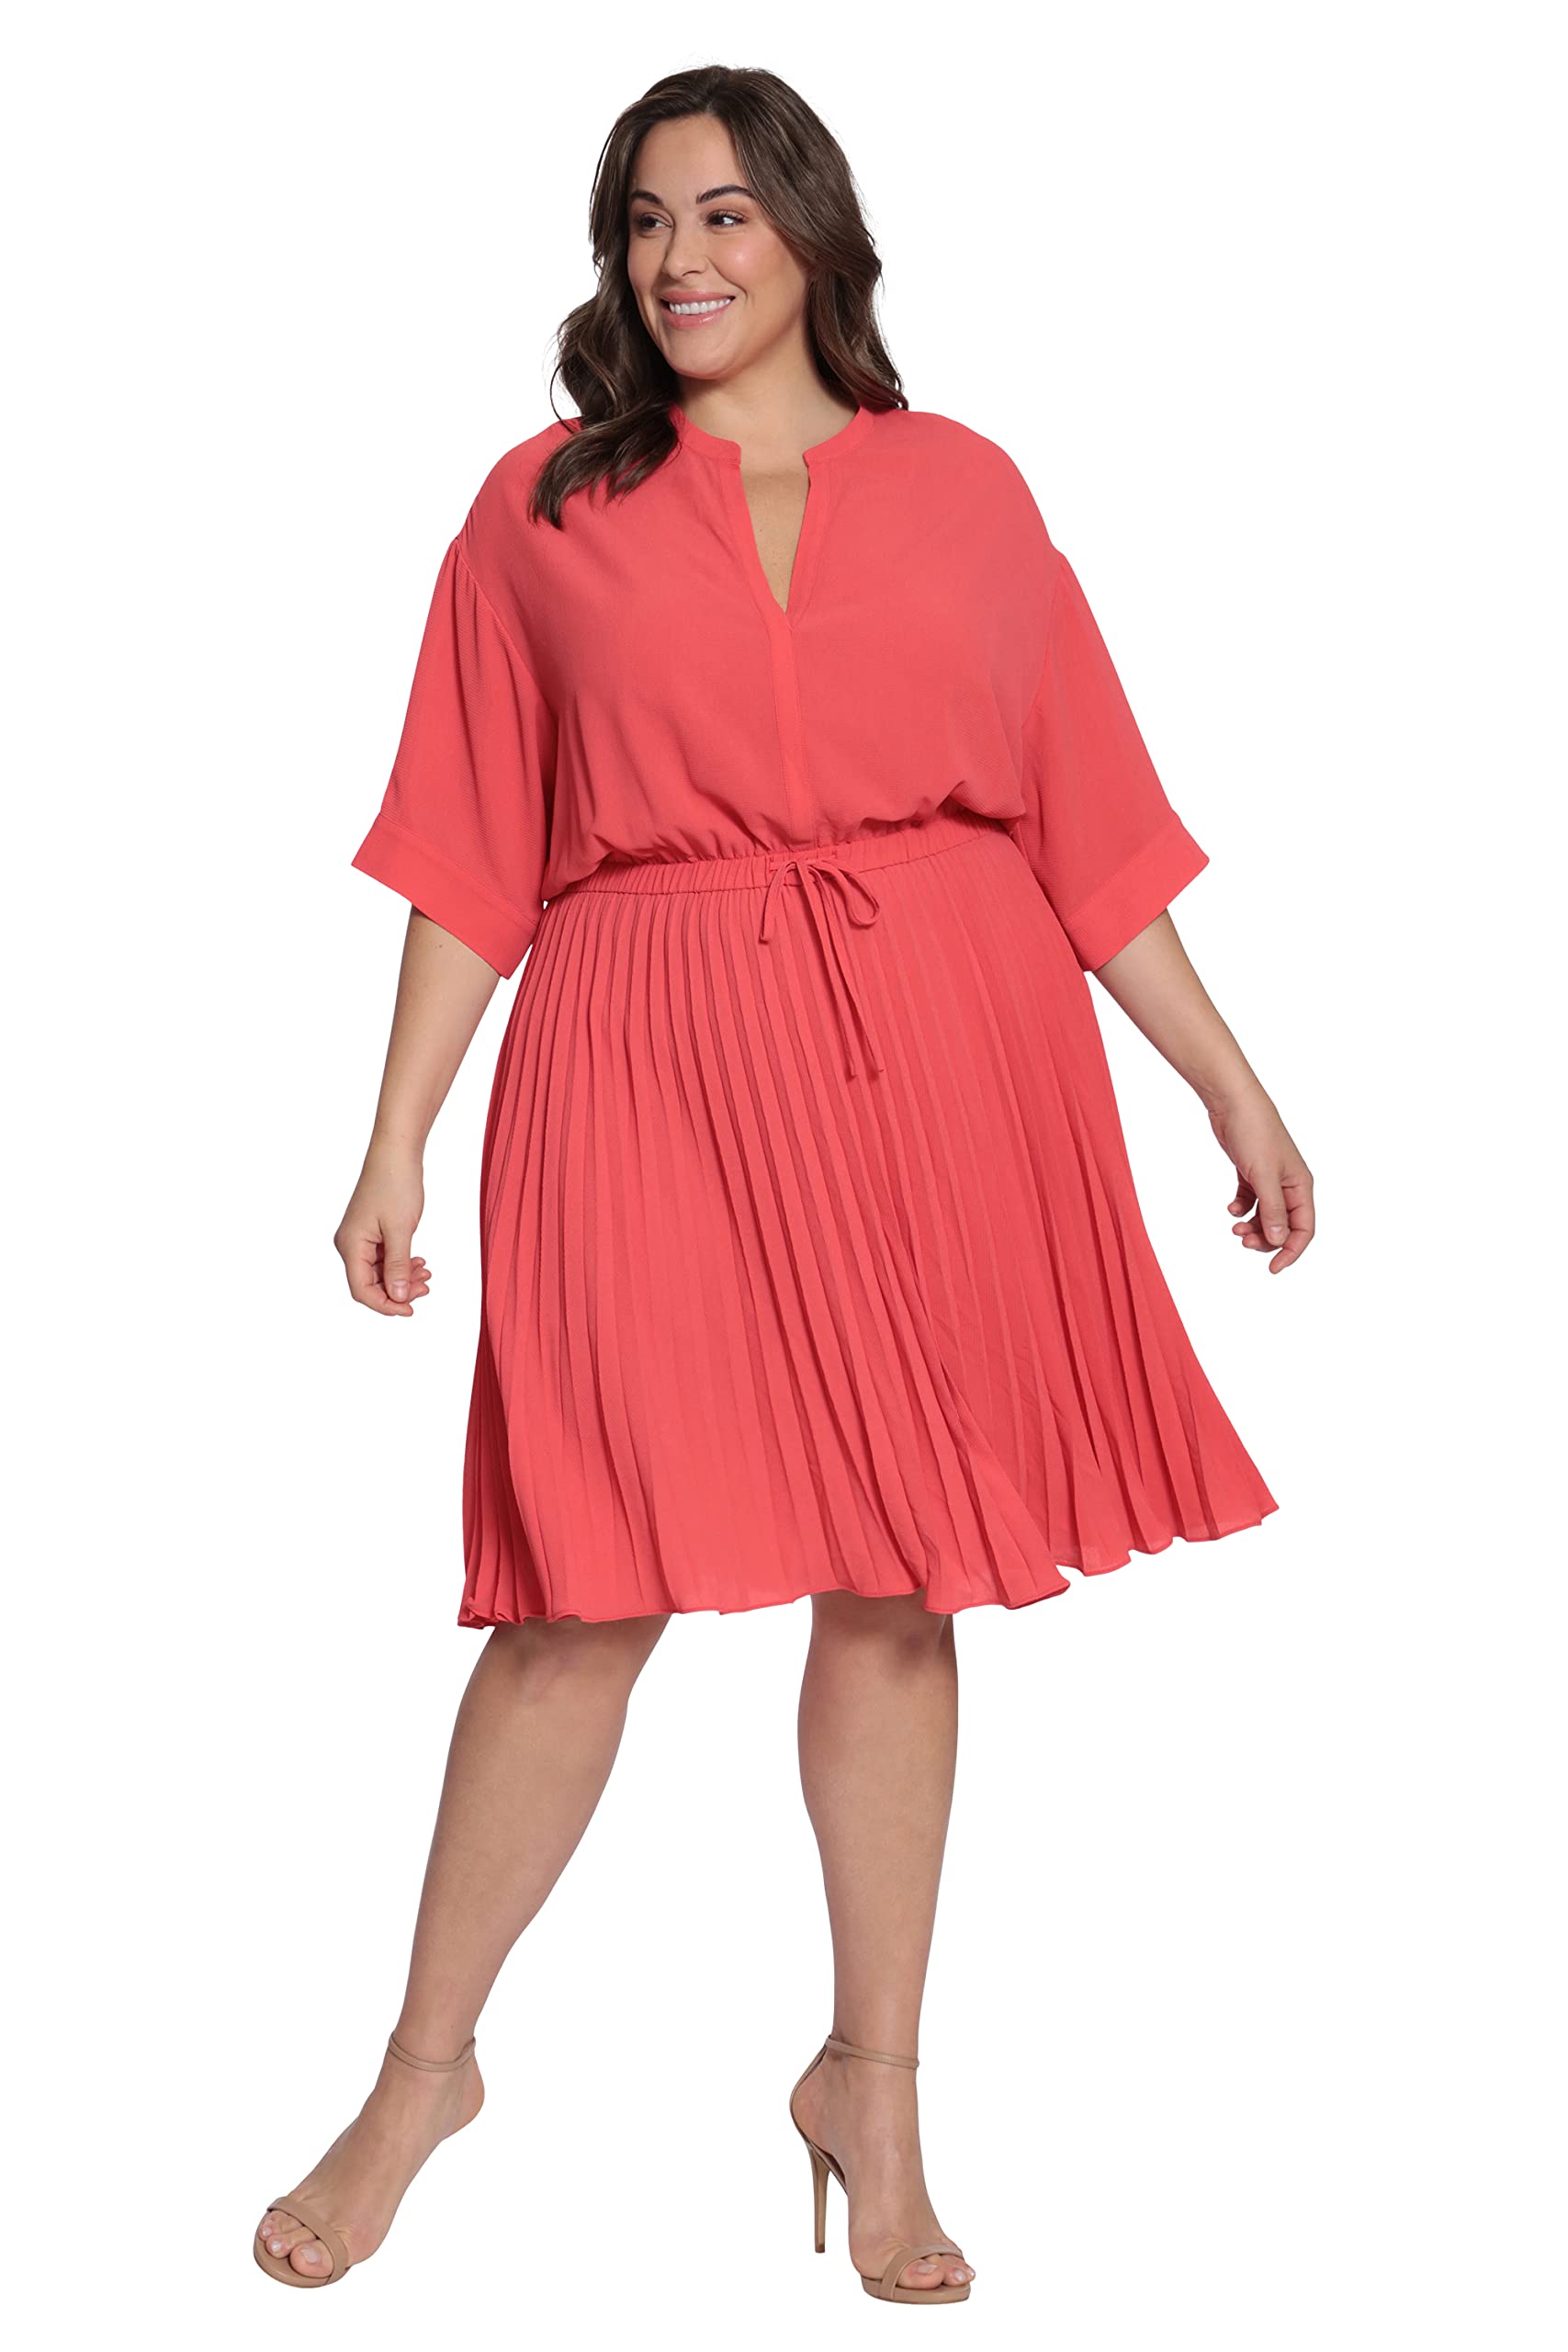 Maggy London Women's Plus Size Short Sleeve Dress with Pleated Skirt